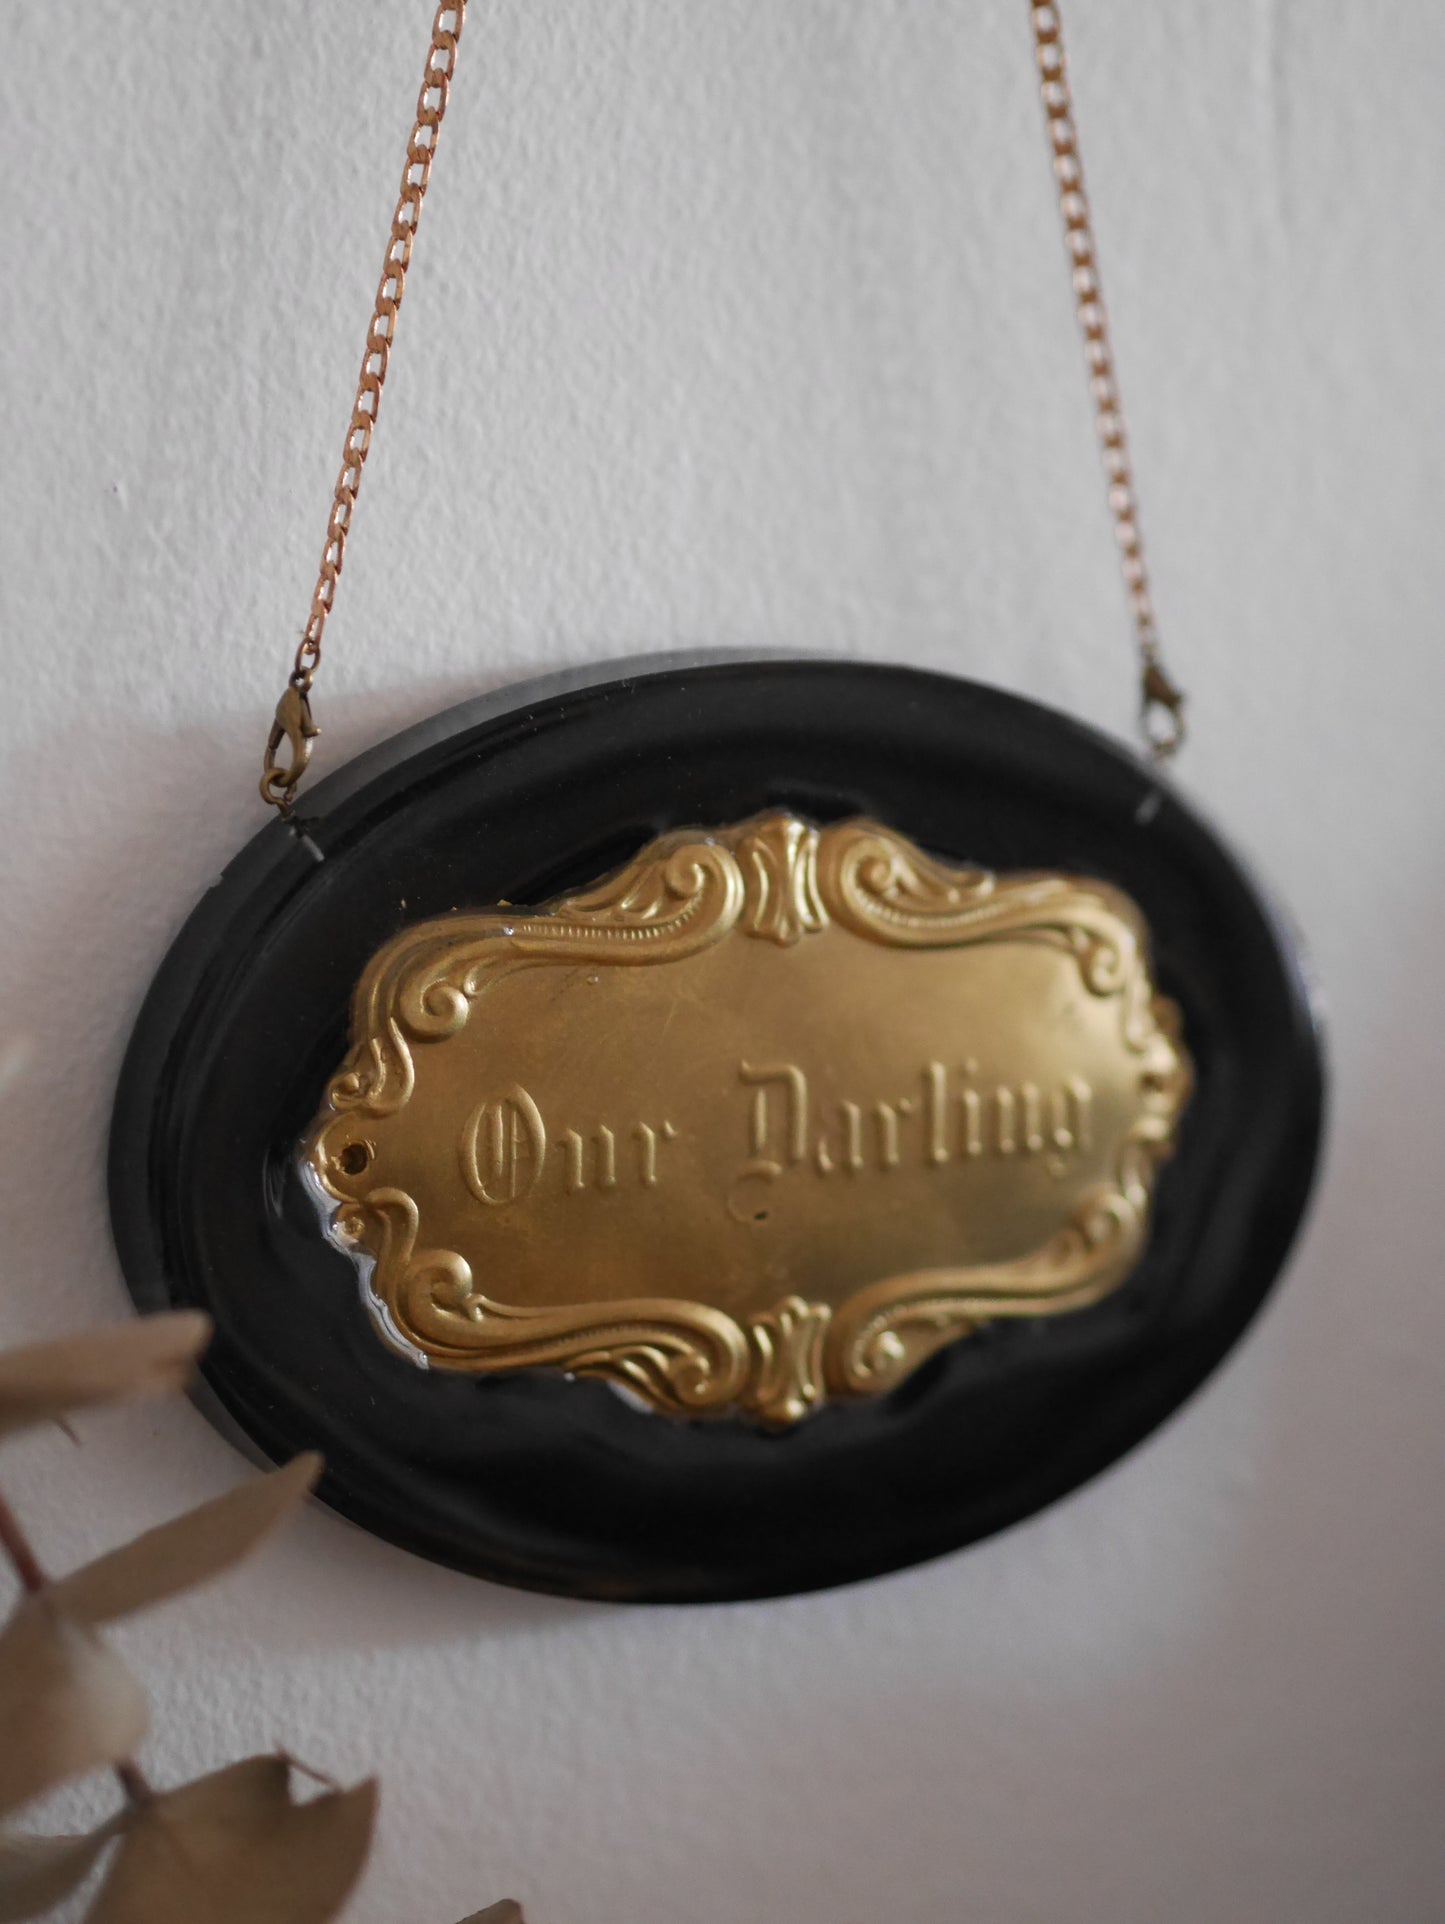 Our Darling Victorian Mourning Casket Plaque - Gold - MADE TO ORDER